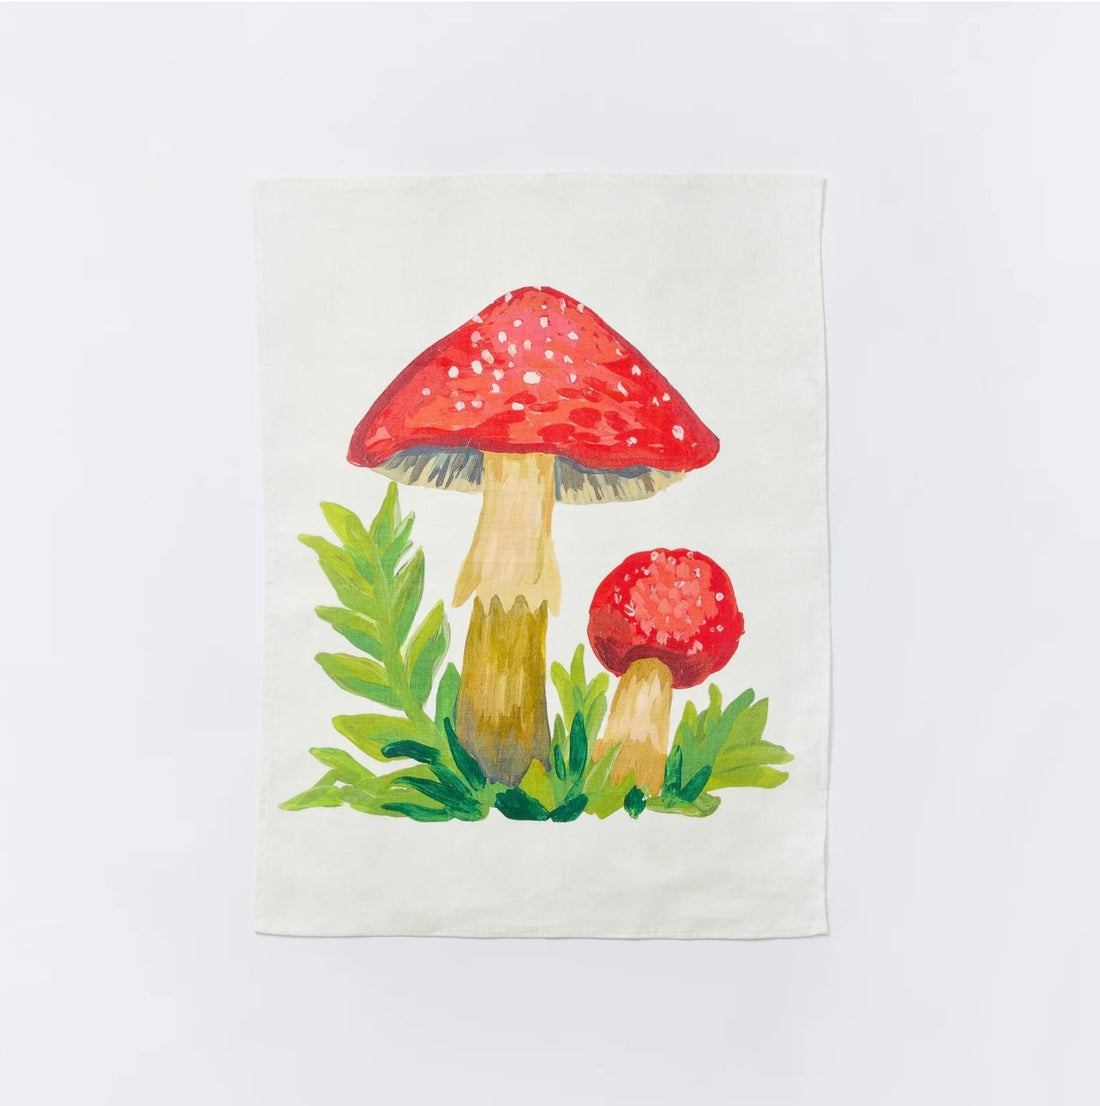 Bonnie and Neil - Mushroom Red Tea Towel - The Flower Crate